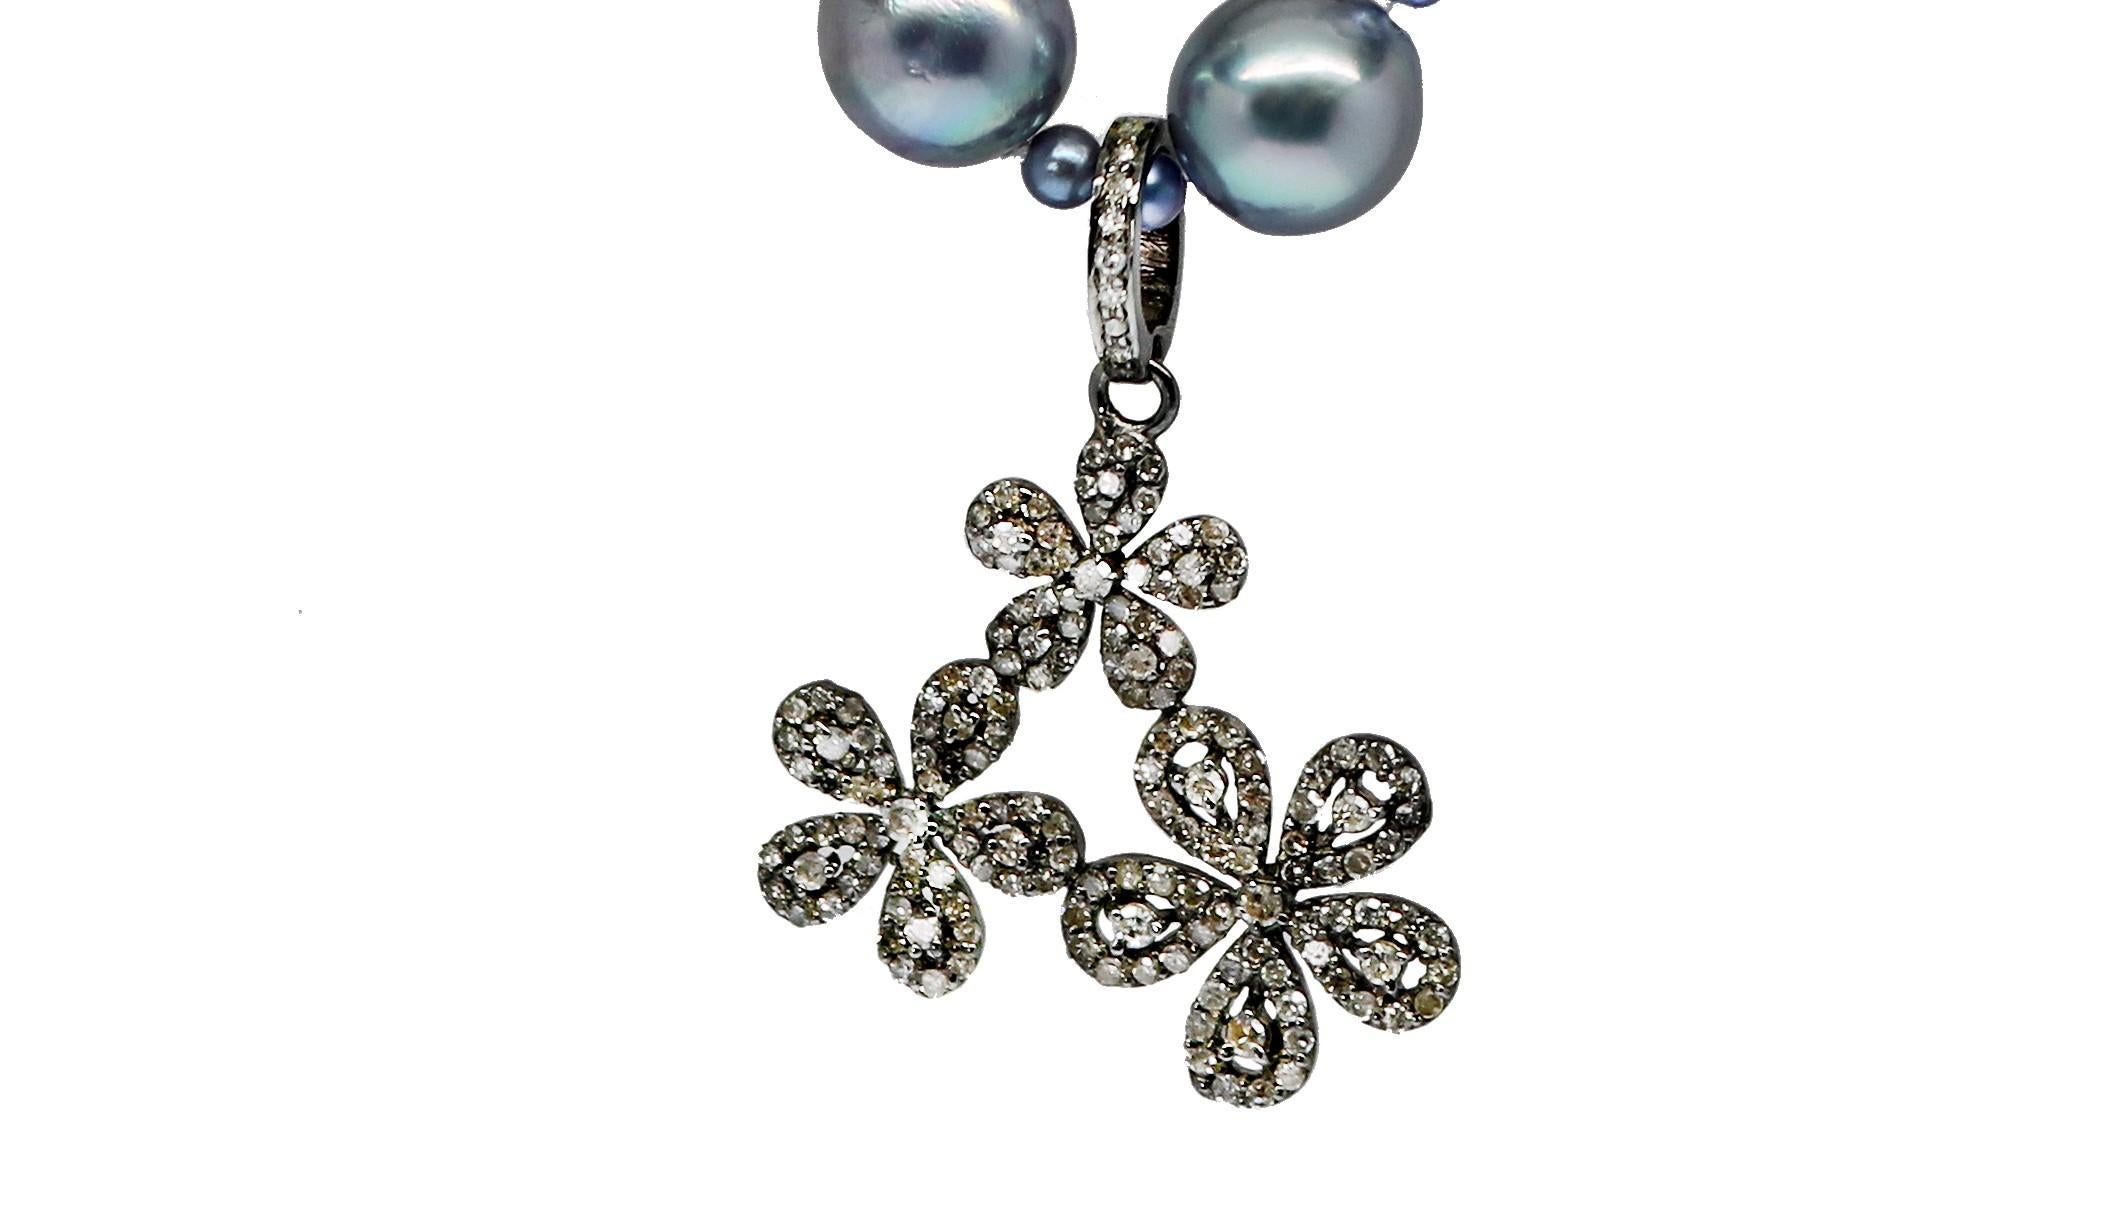 A trio of playful posies kissed with diamonds dangle from this one-of-a-kind pearl necklace. The cheerful sterling silver and diamond charm pendant is featured on a beautiful 21 inch strand of light gray 8-1/4 mm Akoya pearls accented with dyed